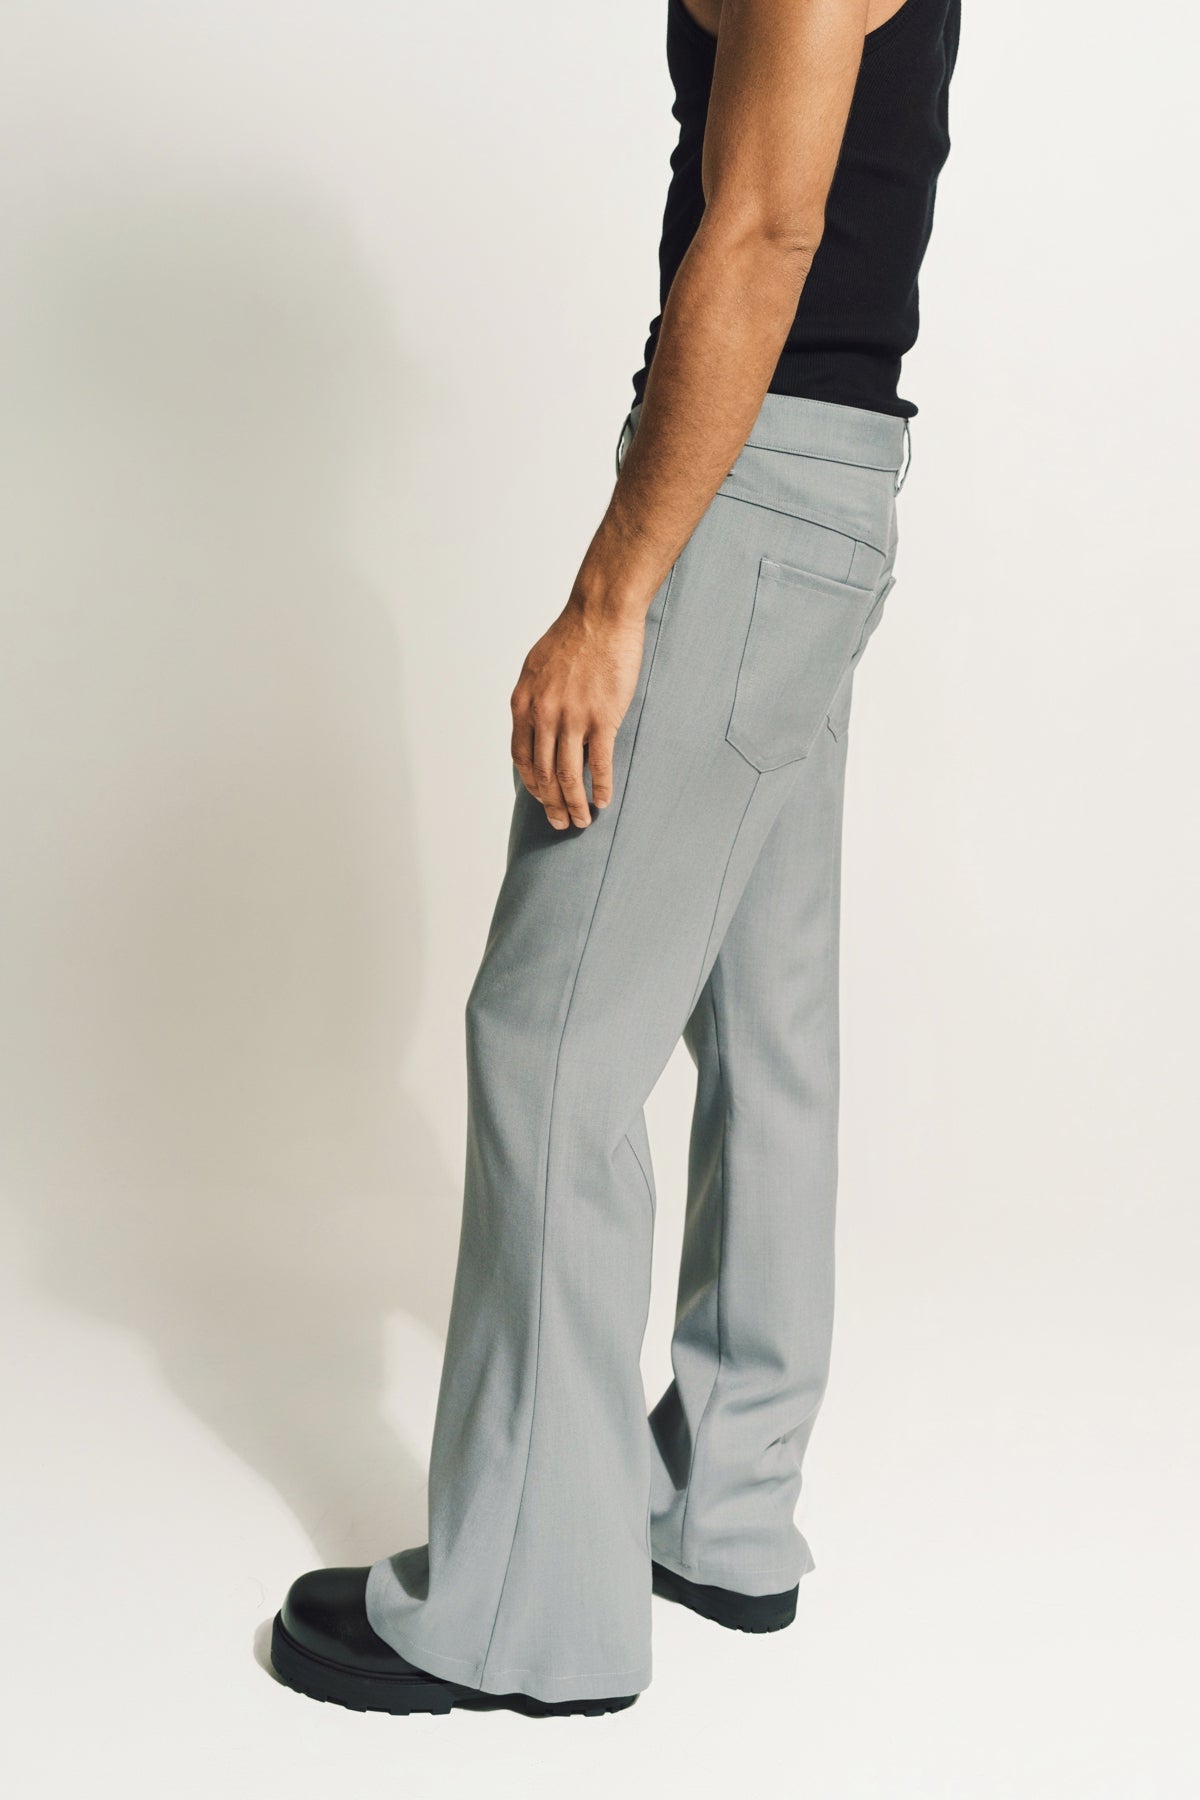 MARNI | EMBROIDERED TROUSERS